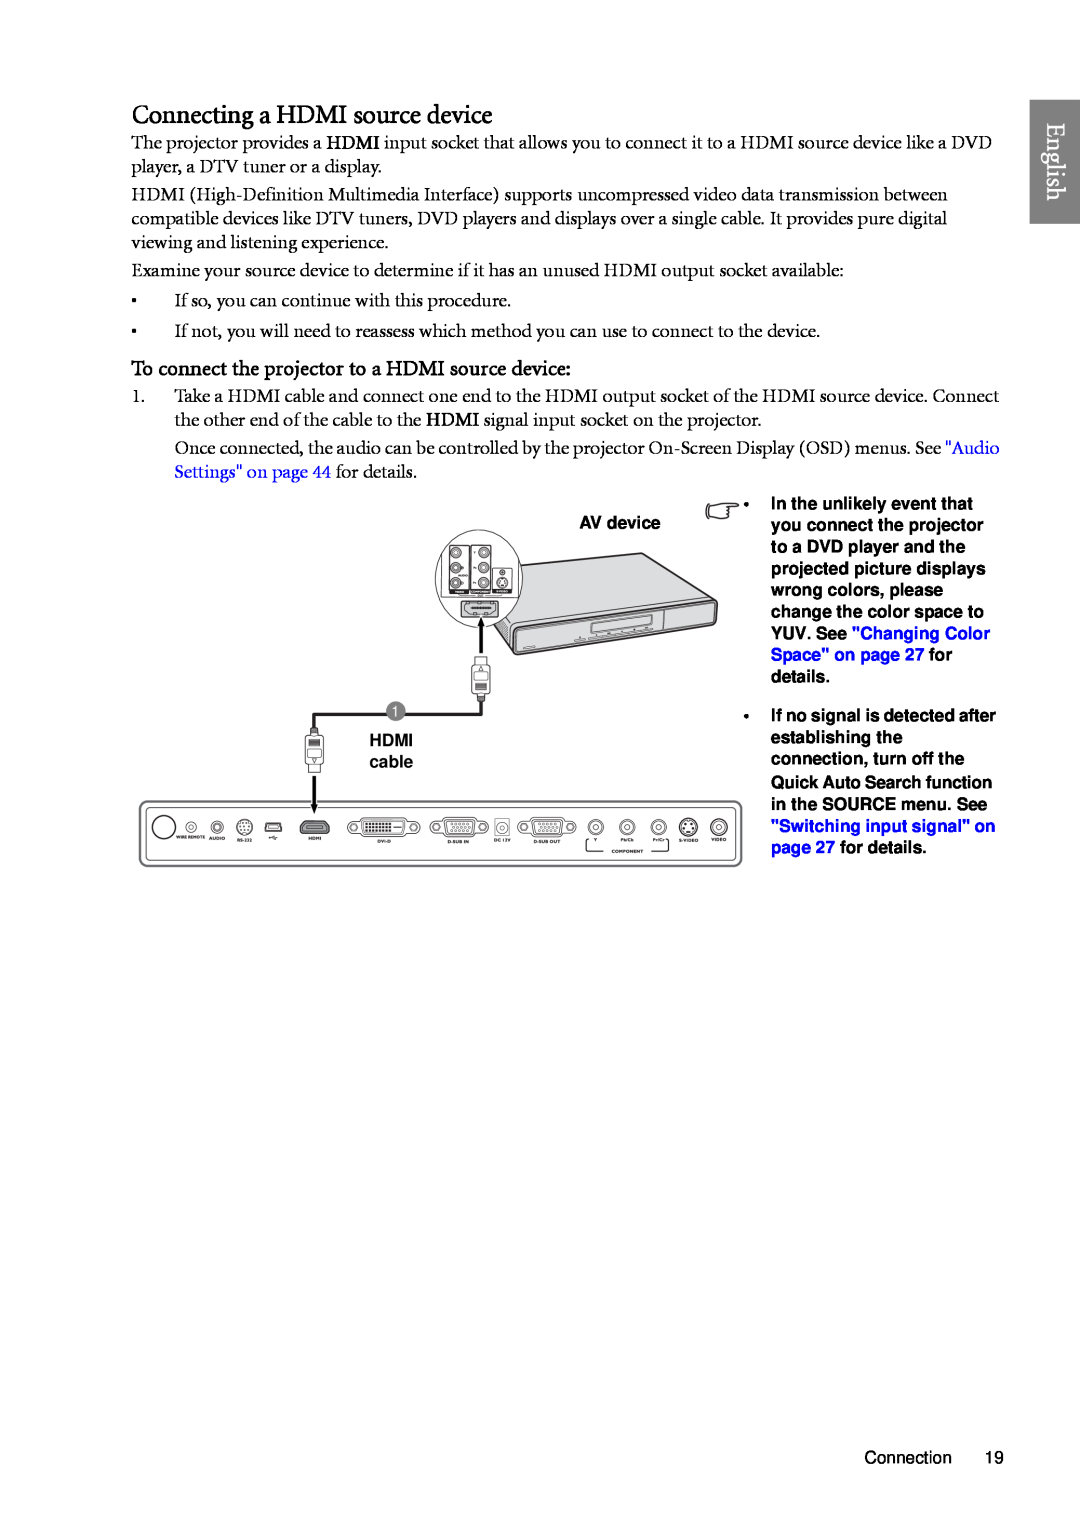 BenQ SP920 user manual Connecting a HDMI source device, English, To connect the projector to a HDMI source device 